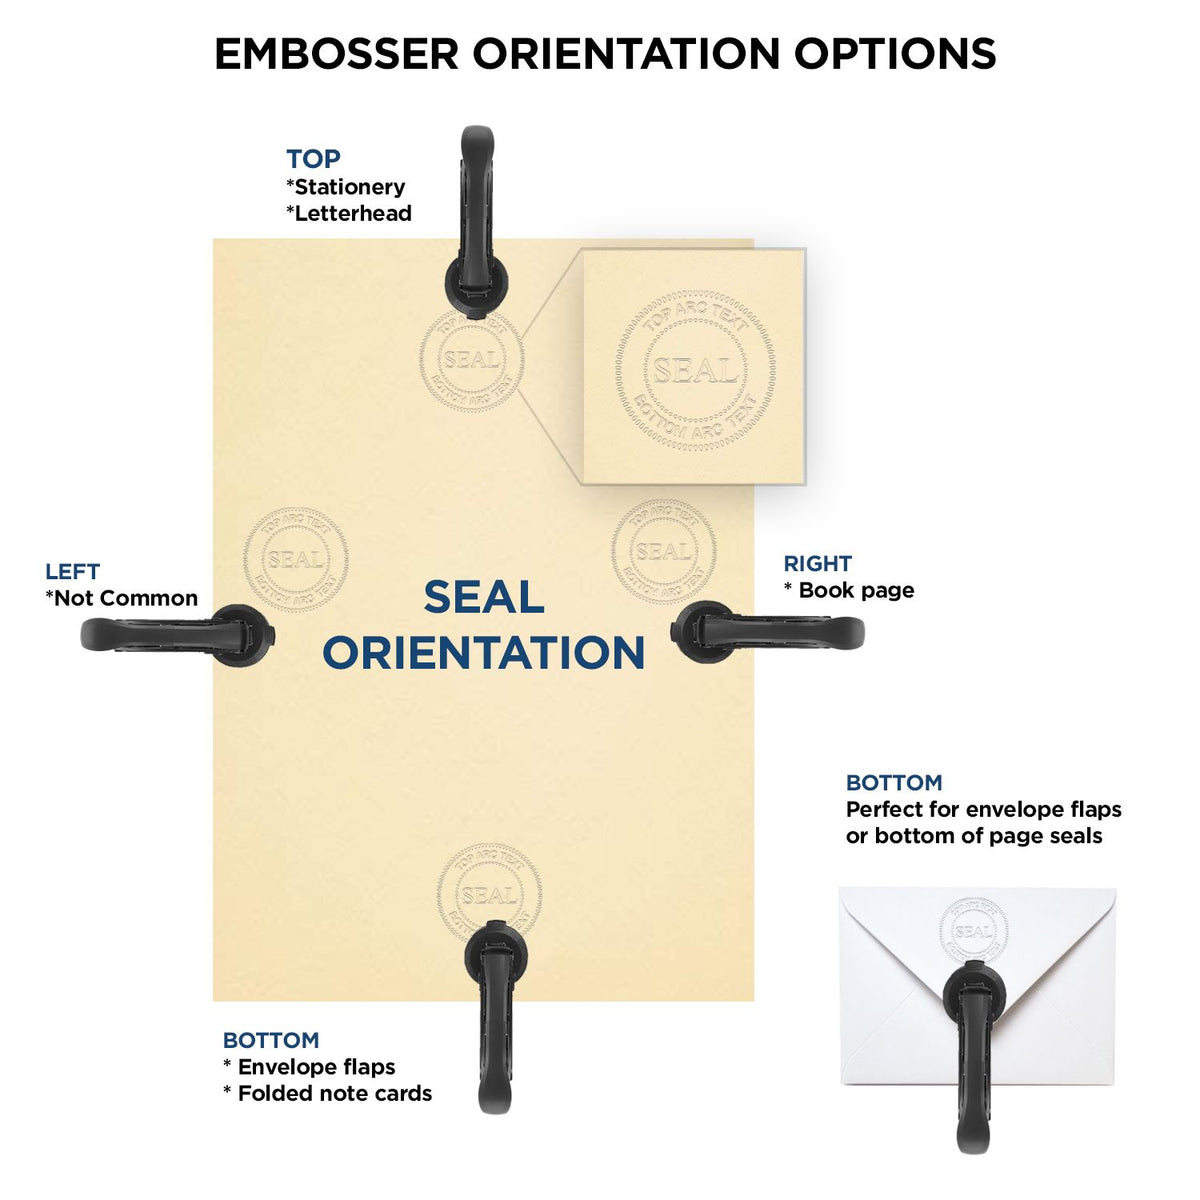 An infographic for the Handheld Iowa Architect Seal Embosser showing embosser orientation, this is showing examples of a top, bottom, right and left insert.